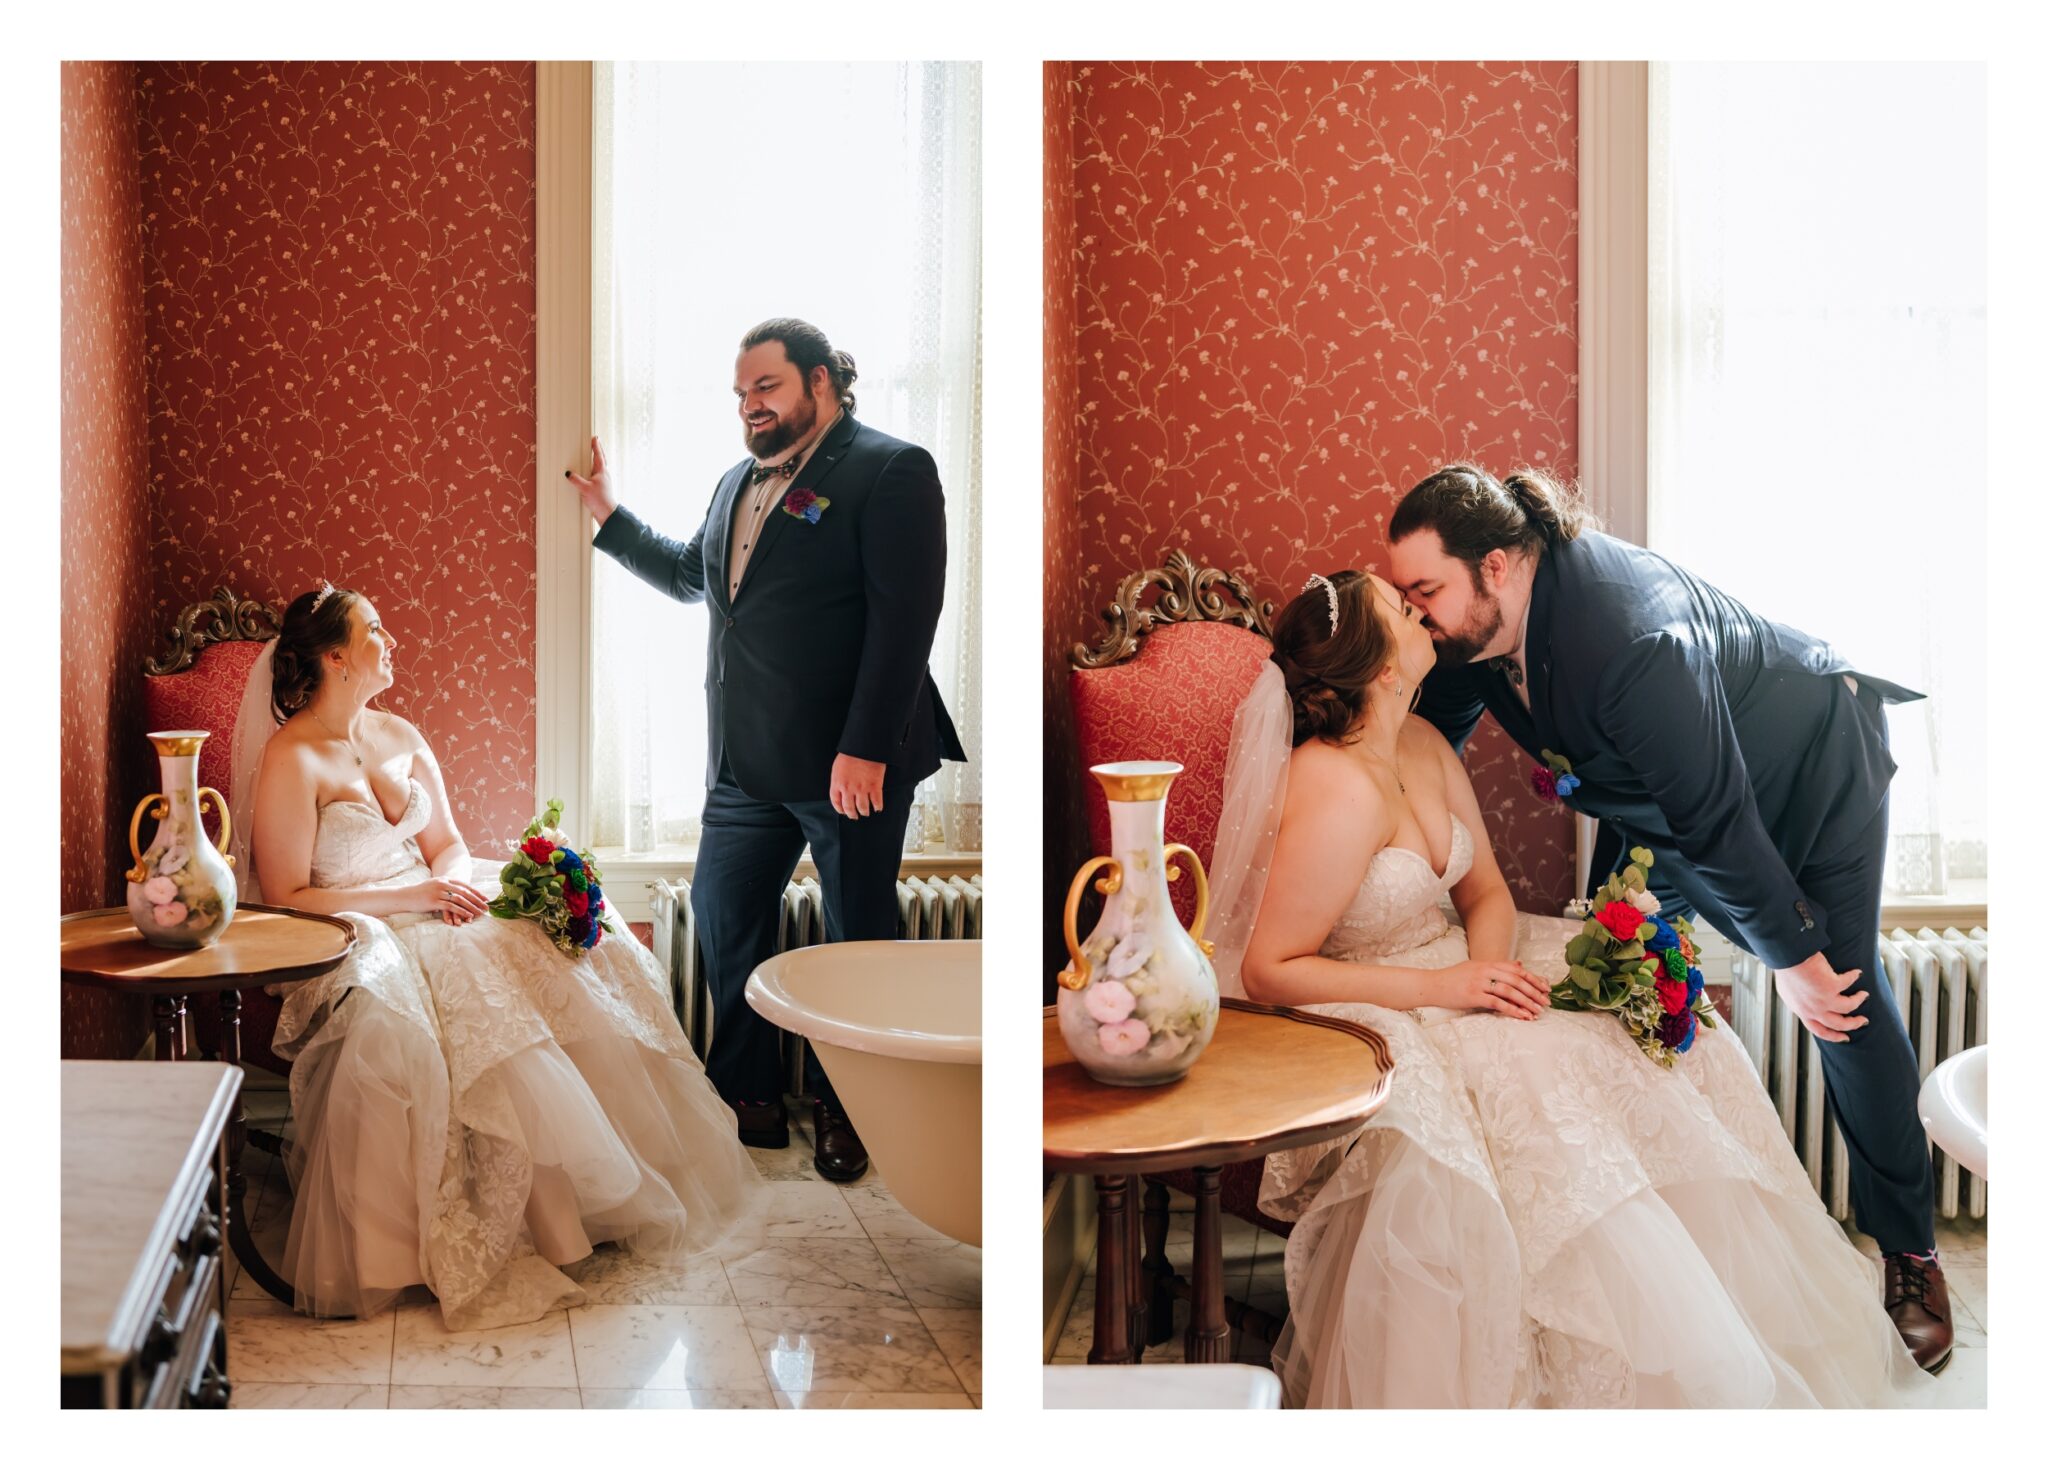 Two portraits of the newlyweds sitting in an ornate historic room